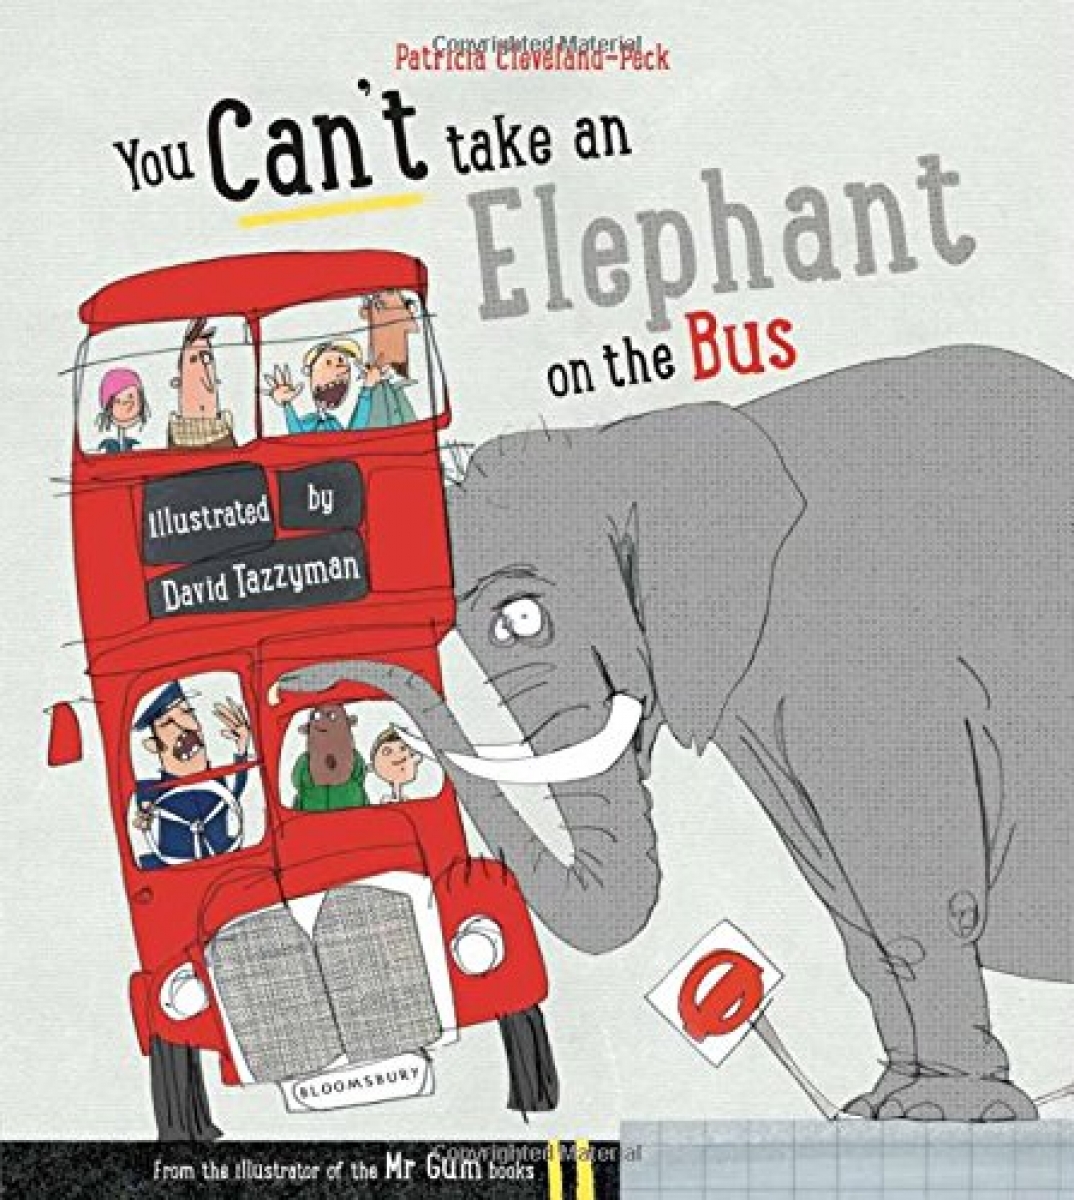 Patricia C. You Can't Take an Elephant on the Bus 